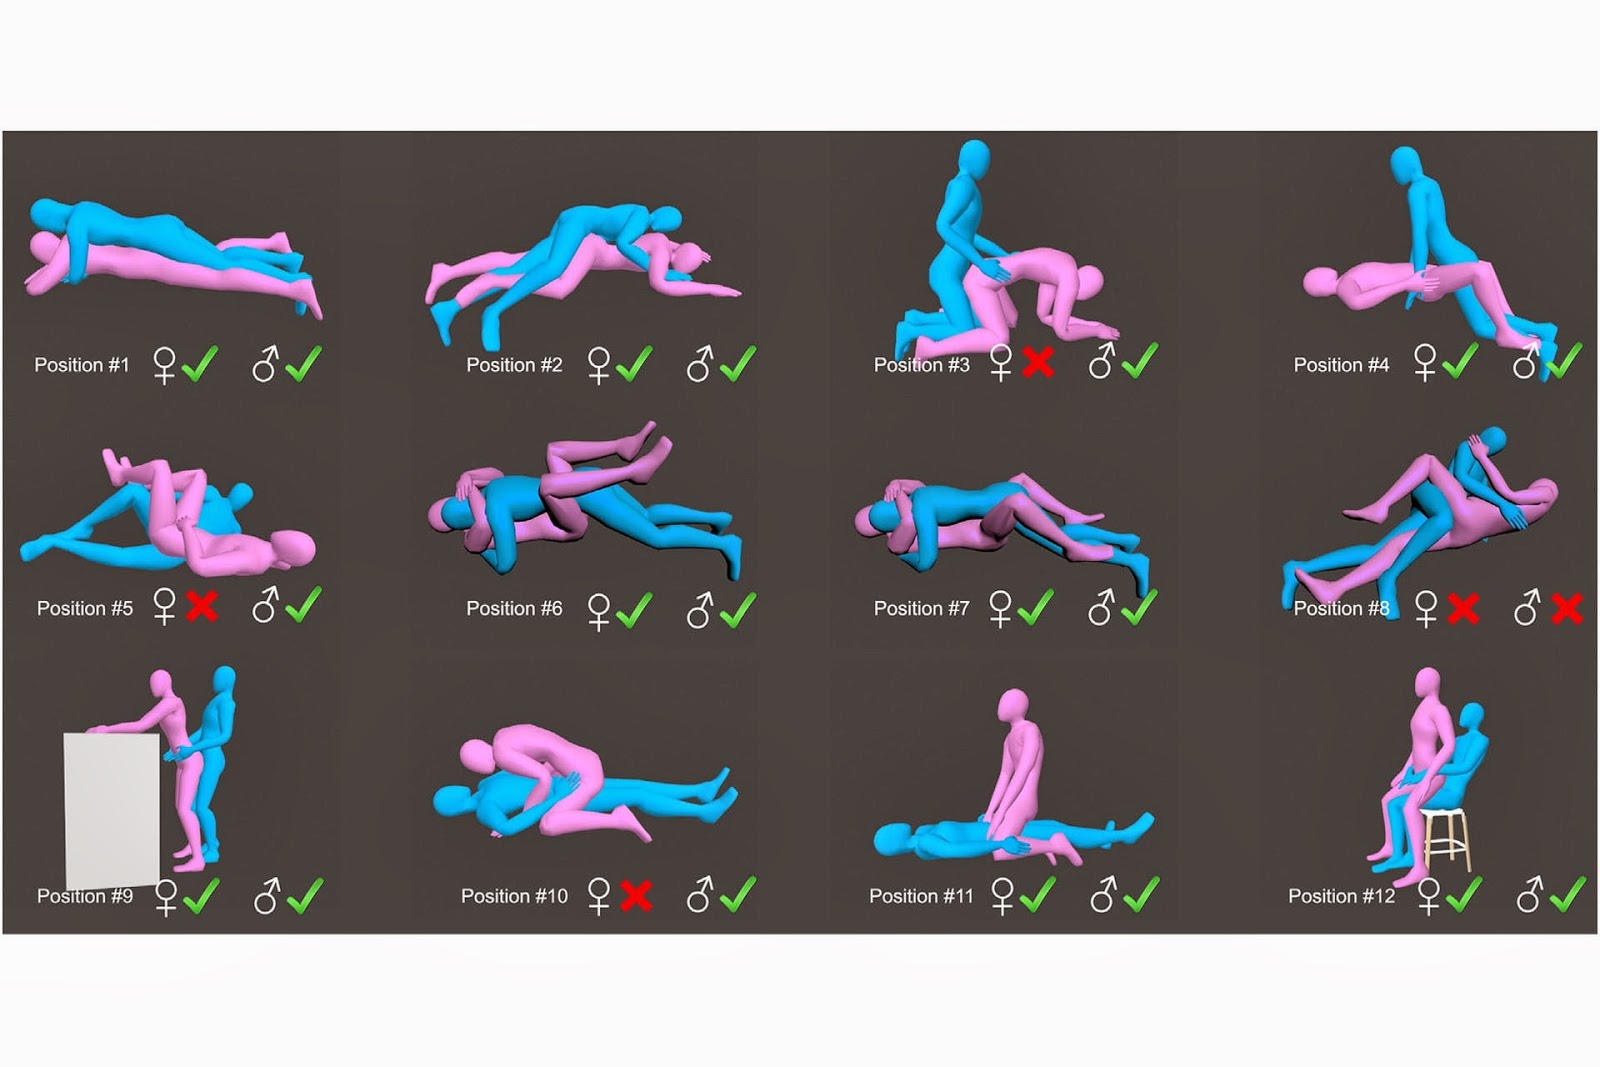 http://www.wired.co.uk/news/archive/2013-11/26/hip-sexual-positions.